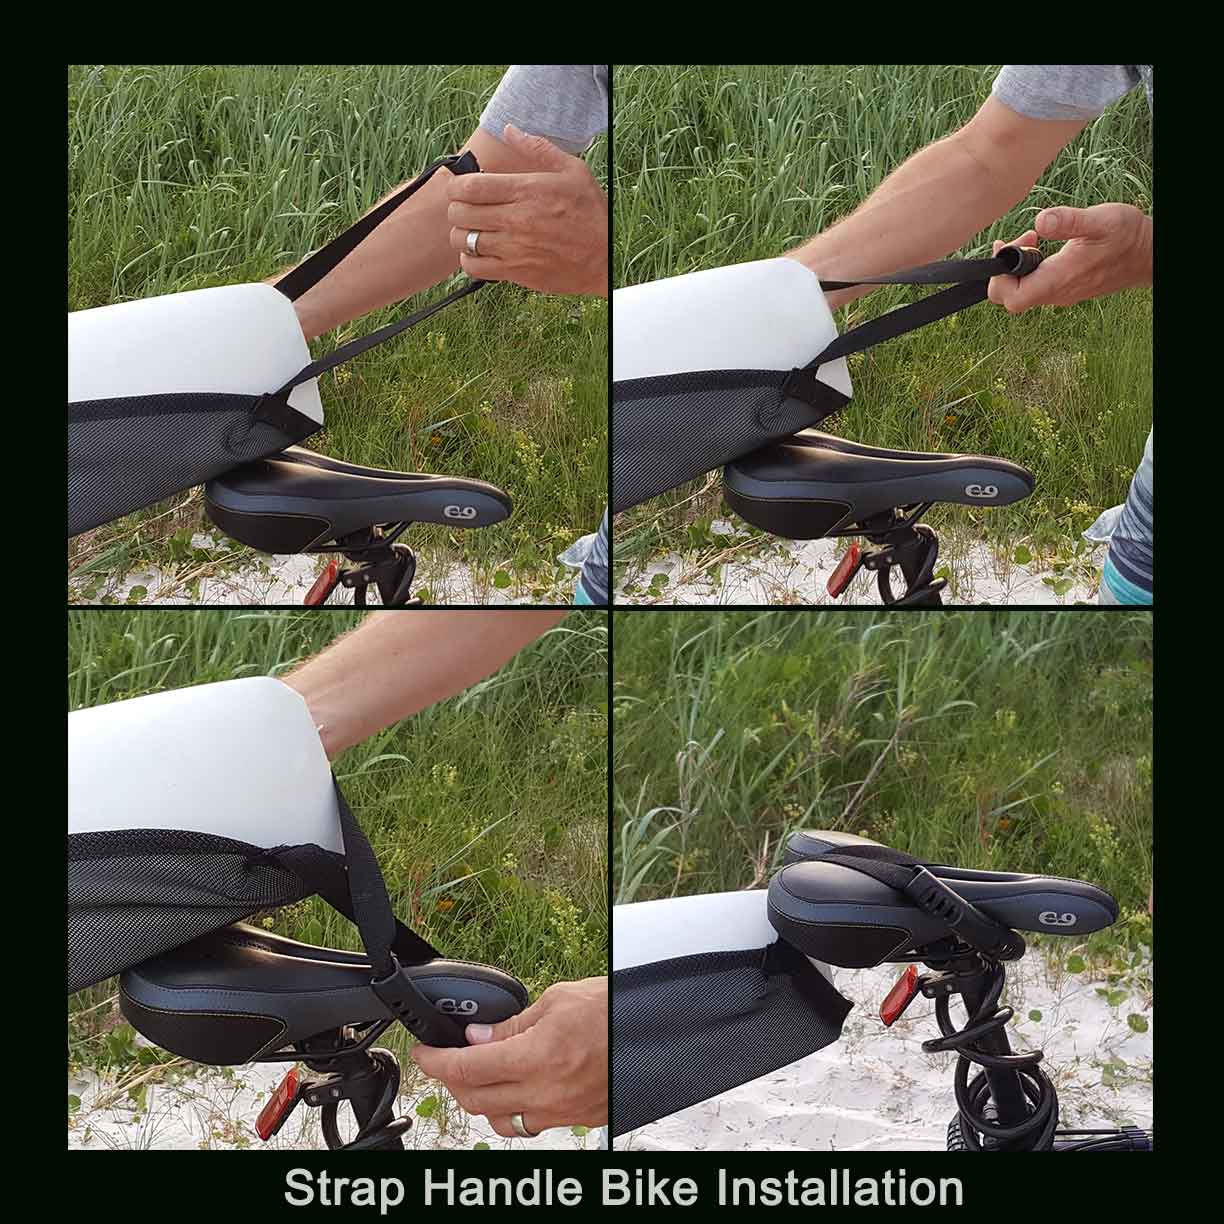 Strap Handle add-on handle for paddle board and connect to bike